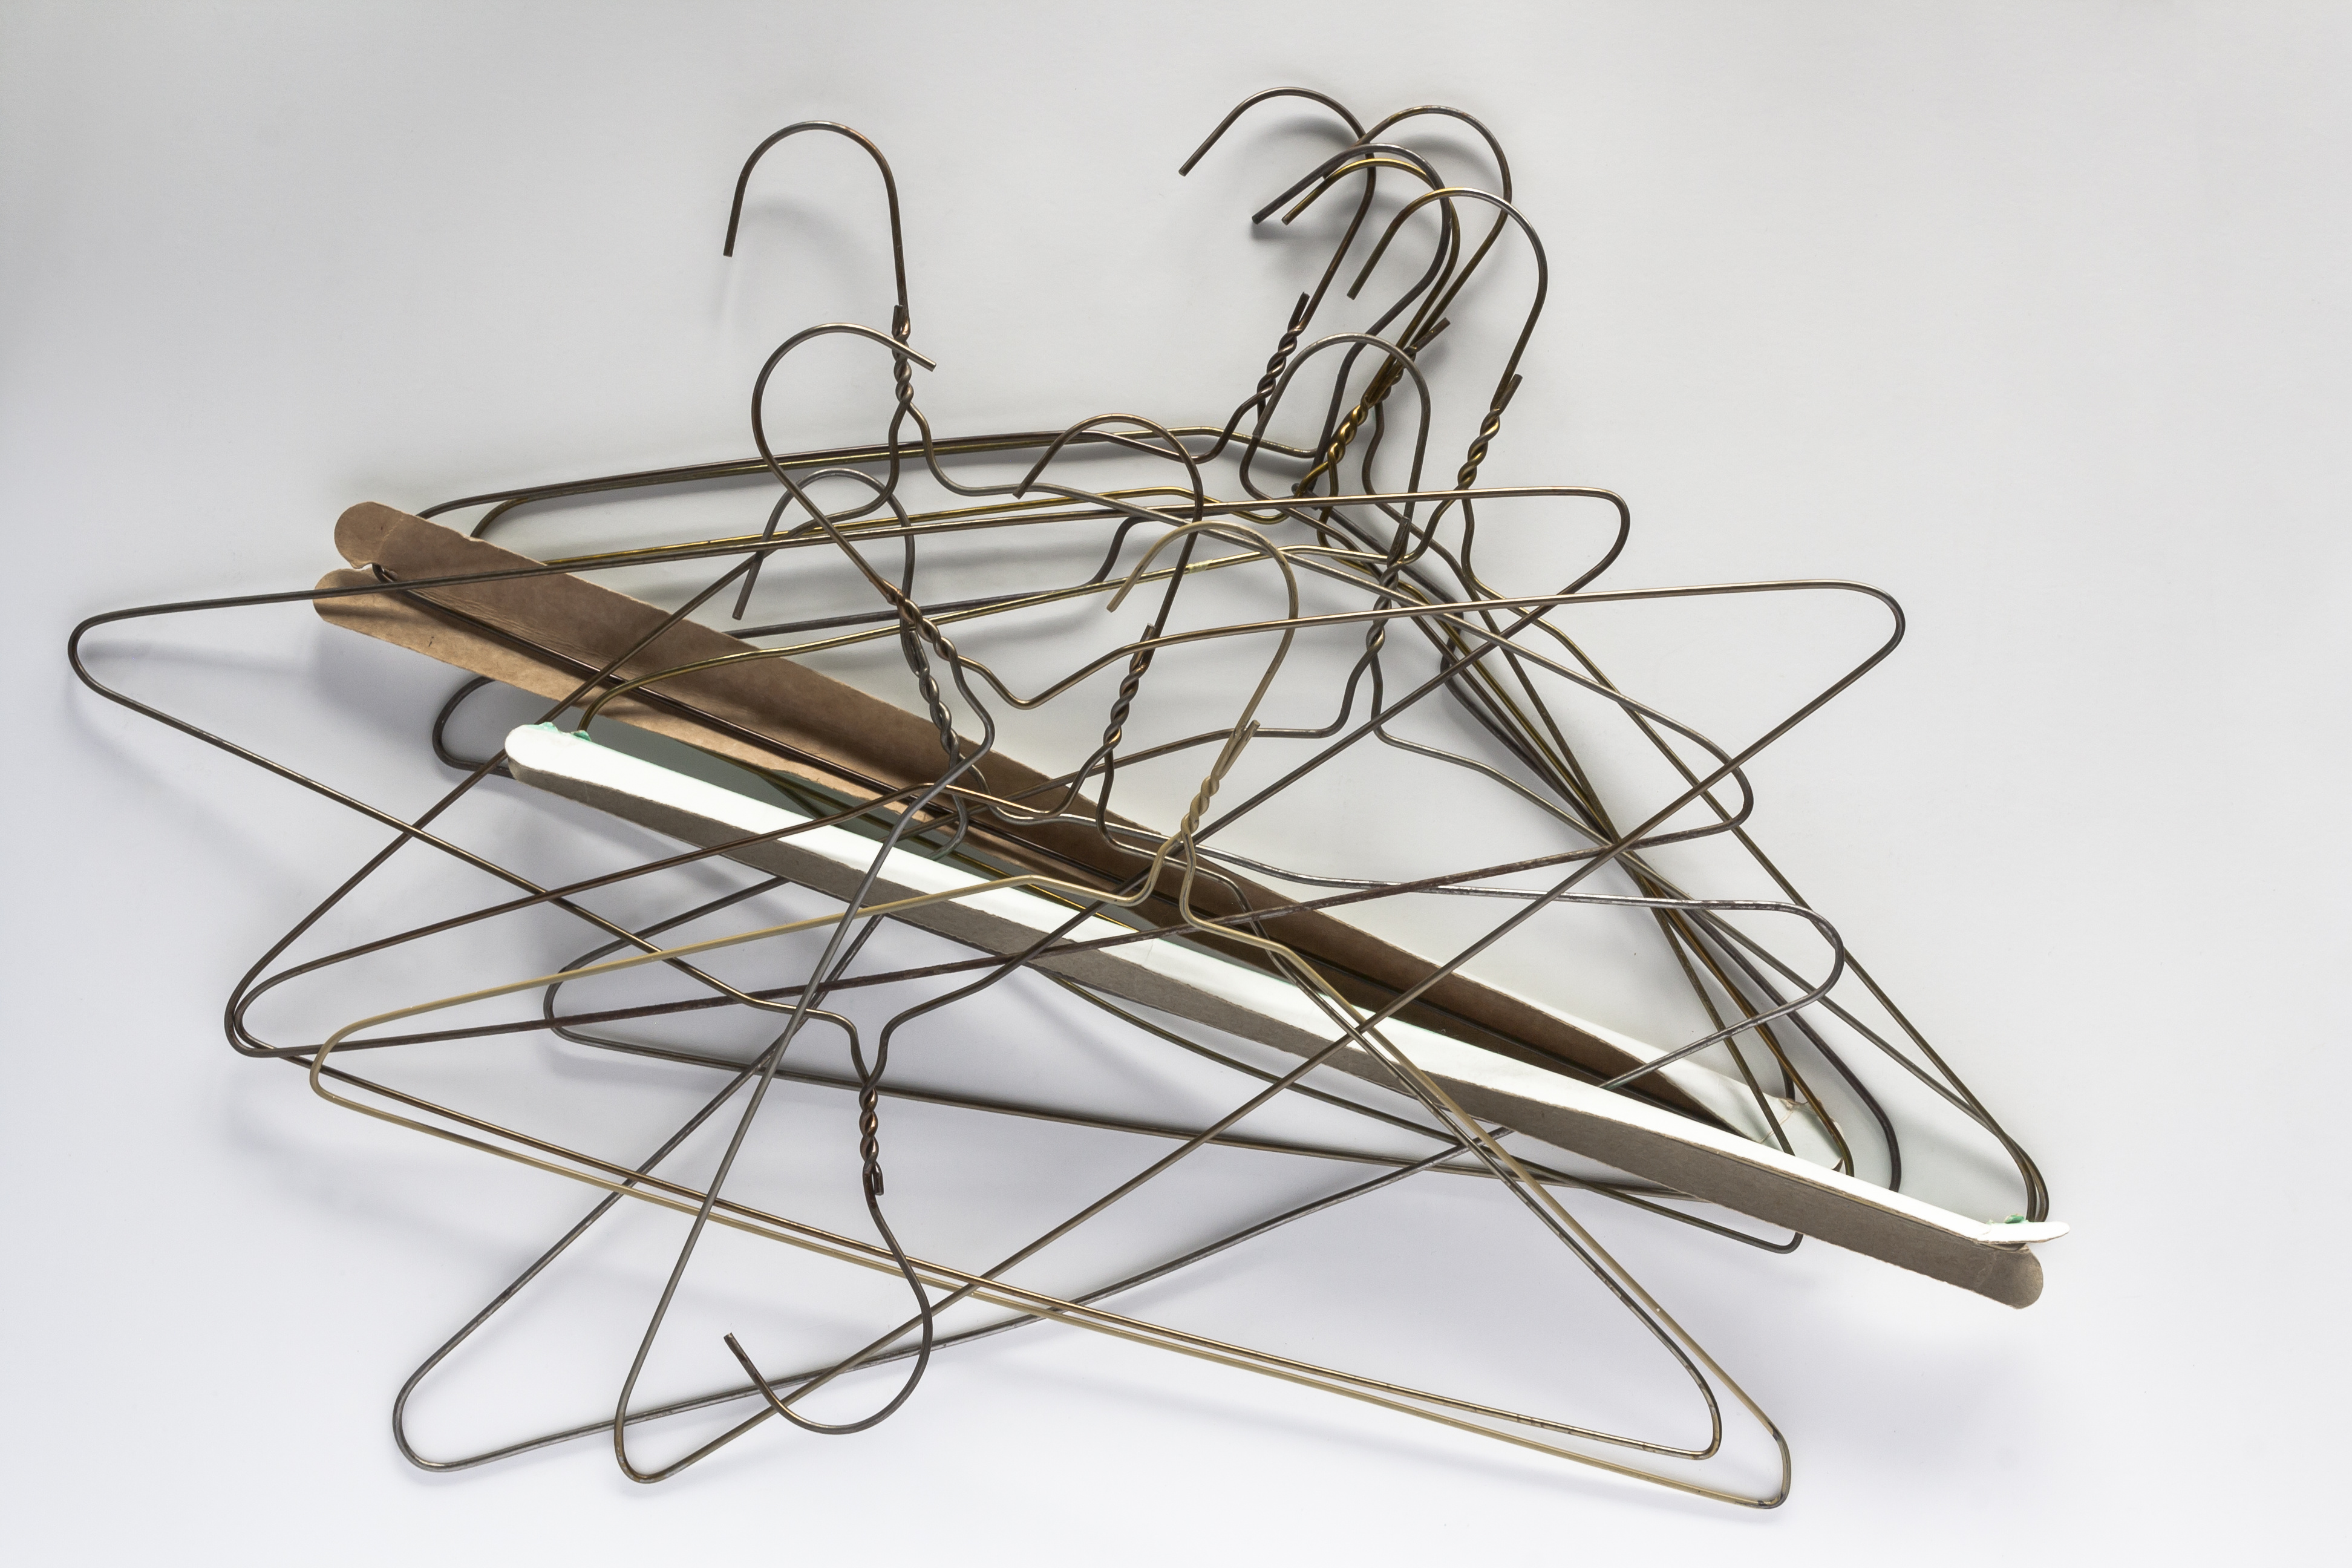 Coat Hangers (Wire) - Napa Recycling and Waste Services